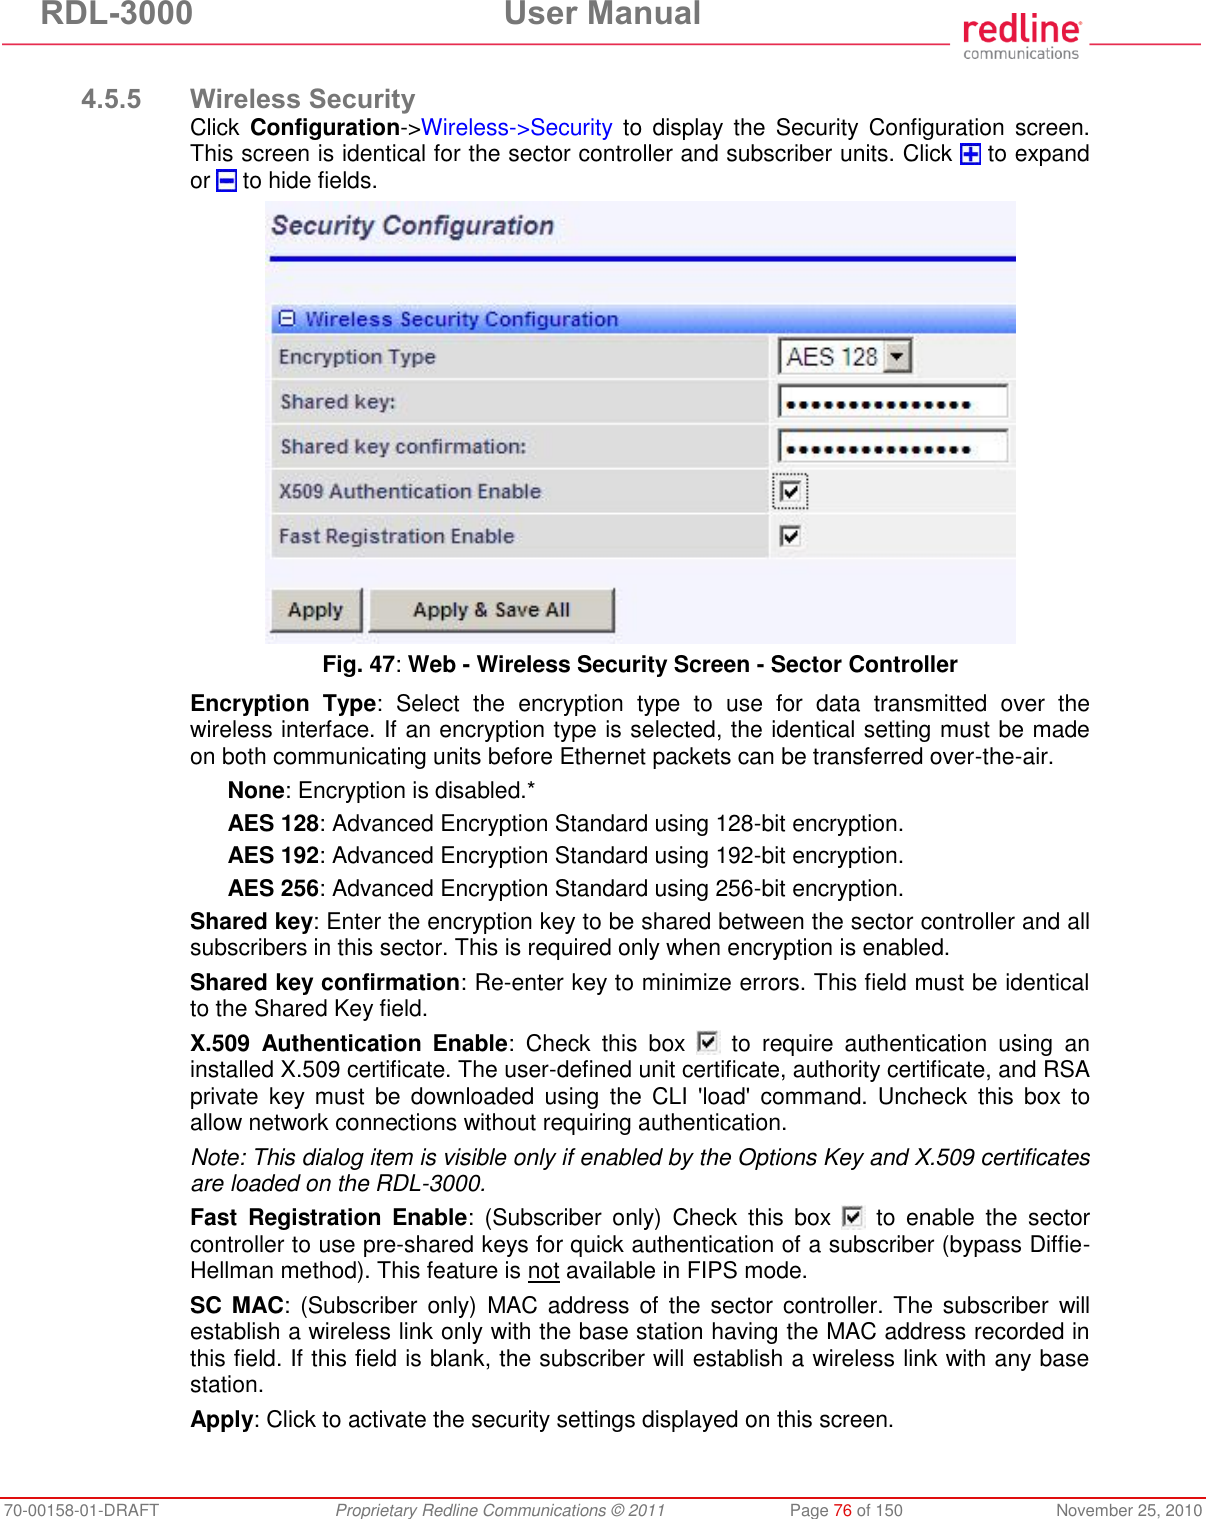 RDL-3000  User Manual 70-00158-01-DRAFT  Proprietary Redline Communications © 2011  Page 76 of 150  November 25, 2010  4.5.5 Wireless Security Click  Configuration-&gt;Wireless-&gt;Security  to  display the  Security  Configuration  screen. This screen is identical for the sector controller and subscriber units. Click   to expand or   to hide fields.  Fig. 47: Web - Wireless Security Screen - Sector Controller Encryption  Type:  Select  the  encryption  type  to  use  for  data  transmitted  over  the wireless interface. If an encryption type is selected, the identical setting must be made on both communicating units before Ethernet packets can be transferred over-the-air. None: Encryption is disabled.* AES 128: Advanced Encryption Standard using 128-bit encryption. AES 192: Advanced Encryption Standard using 192-bit encryption. AES 256: Advanced Encryption Standard using 256-bit encryption. Shared key: Enter the encryption key to be shared between the sector controller and all subscribers in this sector. This is required only when encryption is enabled. Shared key confirmation: Re-enter key to minimize errors. This field must be identical to the Shared Key field. X.509  Authentication  Enable:  Check  this  box    to  require  authentication  using  an installed X.509 certificate. The user-defined unit certificate, authority certificate, and RSA private  key  must  be  downloaded  using  the  CLI  &apos;load&apos;  command.  Uncheck  this  box  to allow network connections without requiring authentication. Note: This dialog item is visible only if enabled by the Options Key and X.509 certificates are loaded on the RDL-3000. Fast  Registration  Enable:  (Subscriber  only)  Check  this  box    to  enable  the  sector controller to use pre-shared keys for quick authentication of a subscriber (bypass Diffie-Hellman method). This feature is not available in FIPS mode. SC MAC: (Subscriber only)  MAC address  of  the sector  controller. The subscriber  will establish a wireless link only with the base station having the MAC address recorded in this field. If this field is blank, the subscriber will establish a wireless link with any base station. Apply: Click to activate the security settings displayed on this screen. 